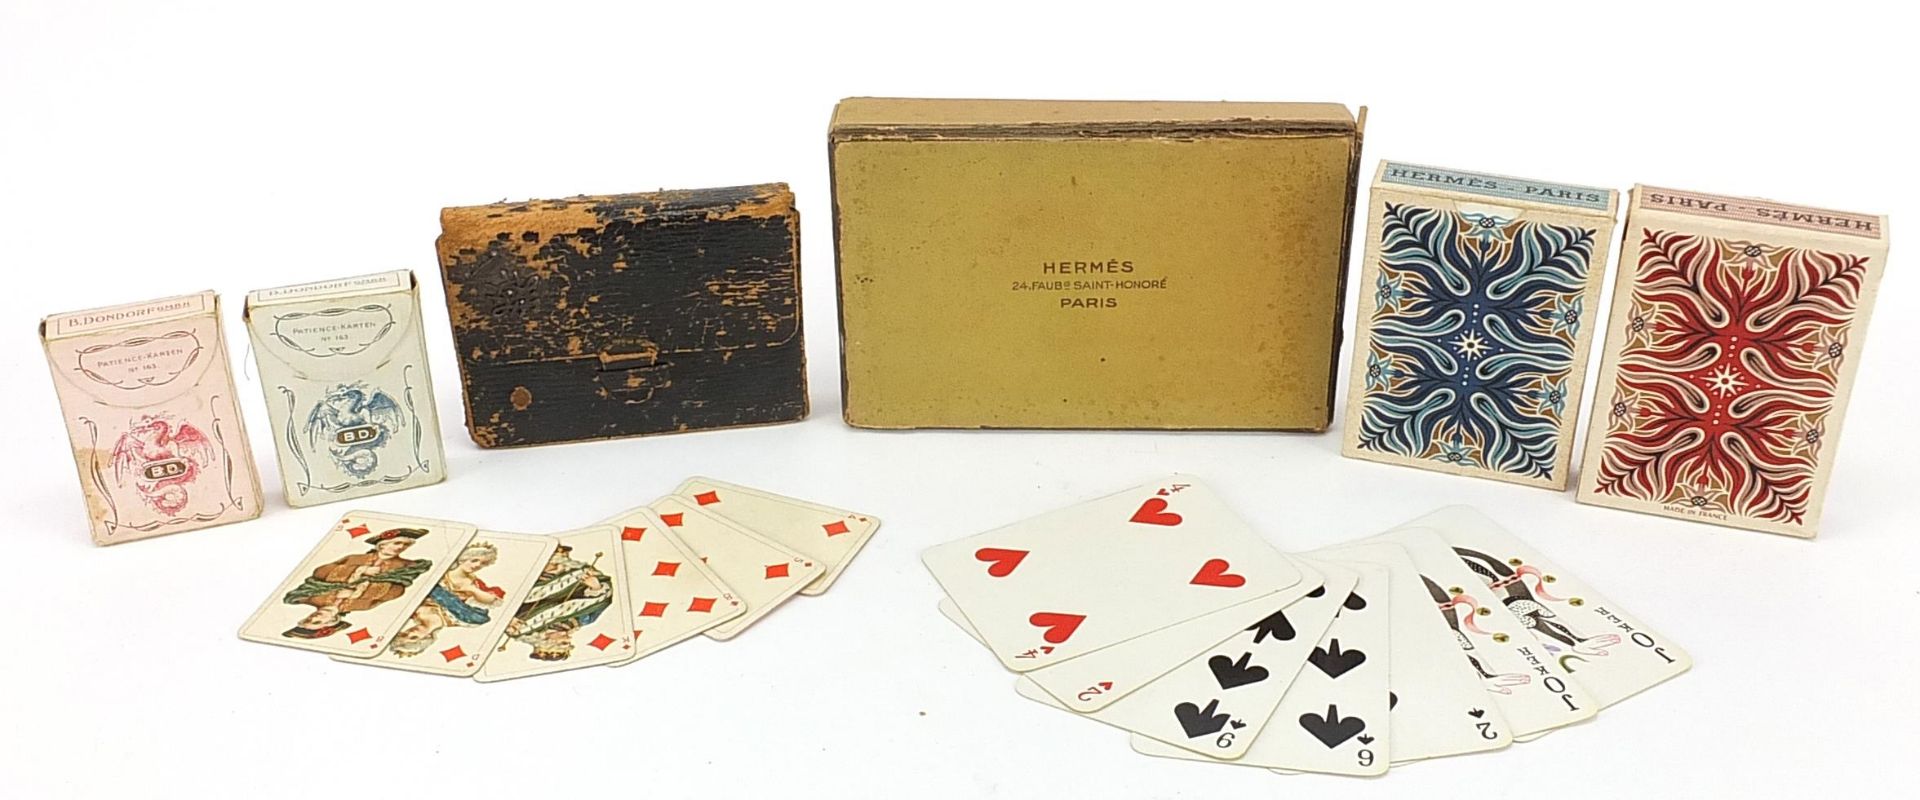 Four packets of vintage playing cards retailed by Hermes Paris and Lovegrove & Flint